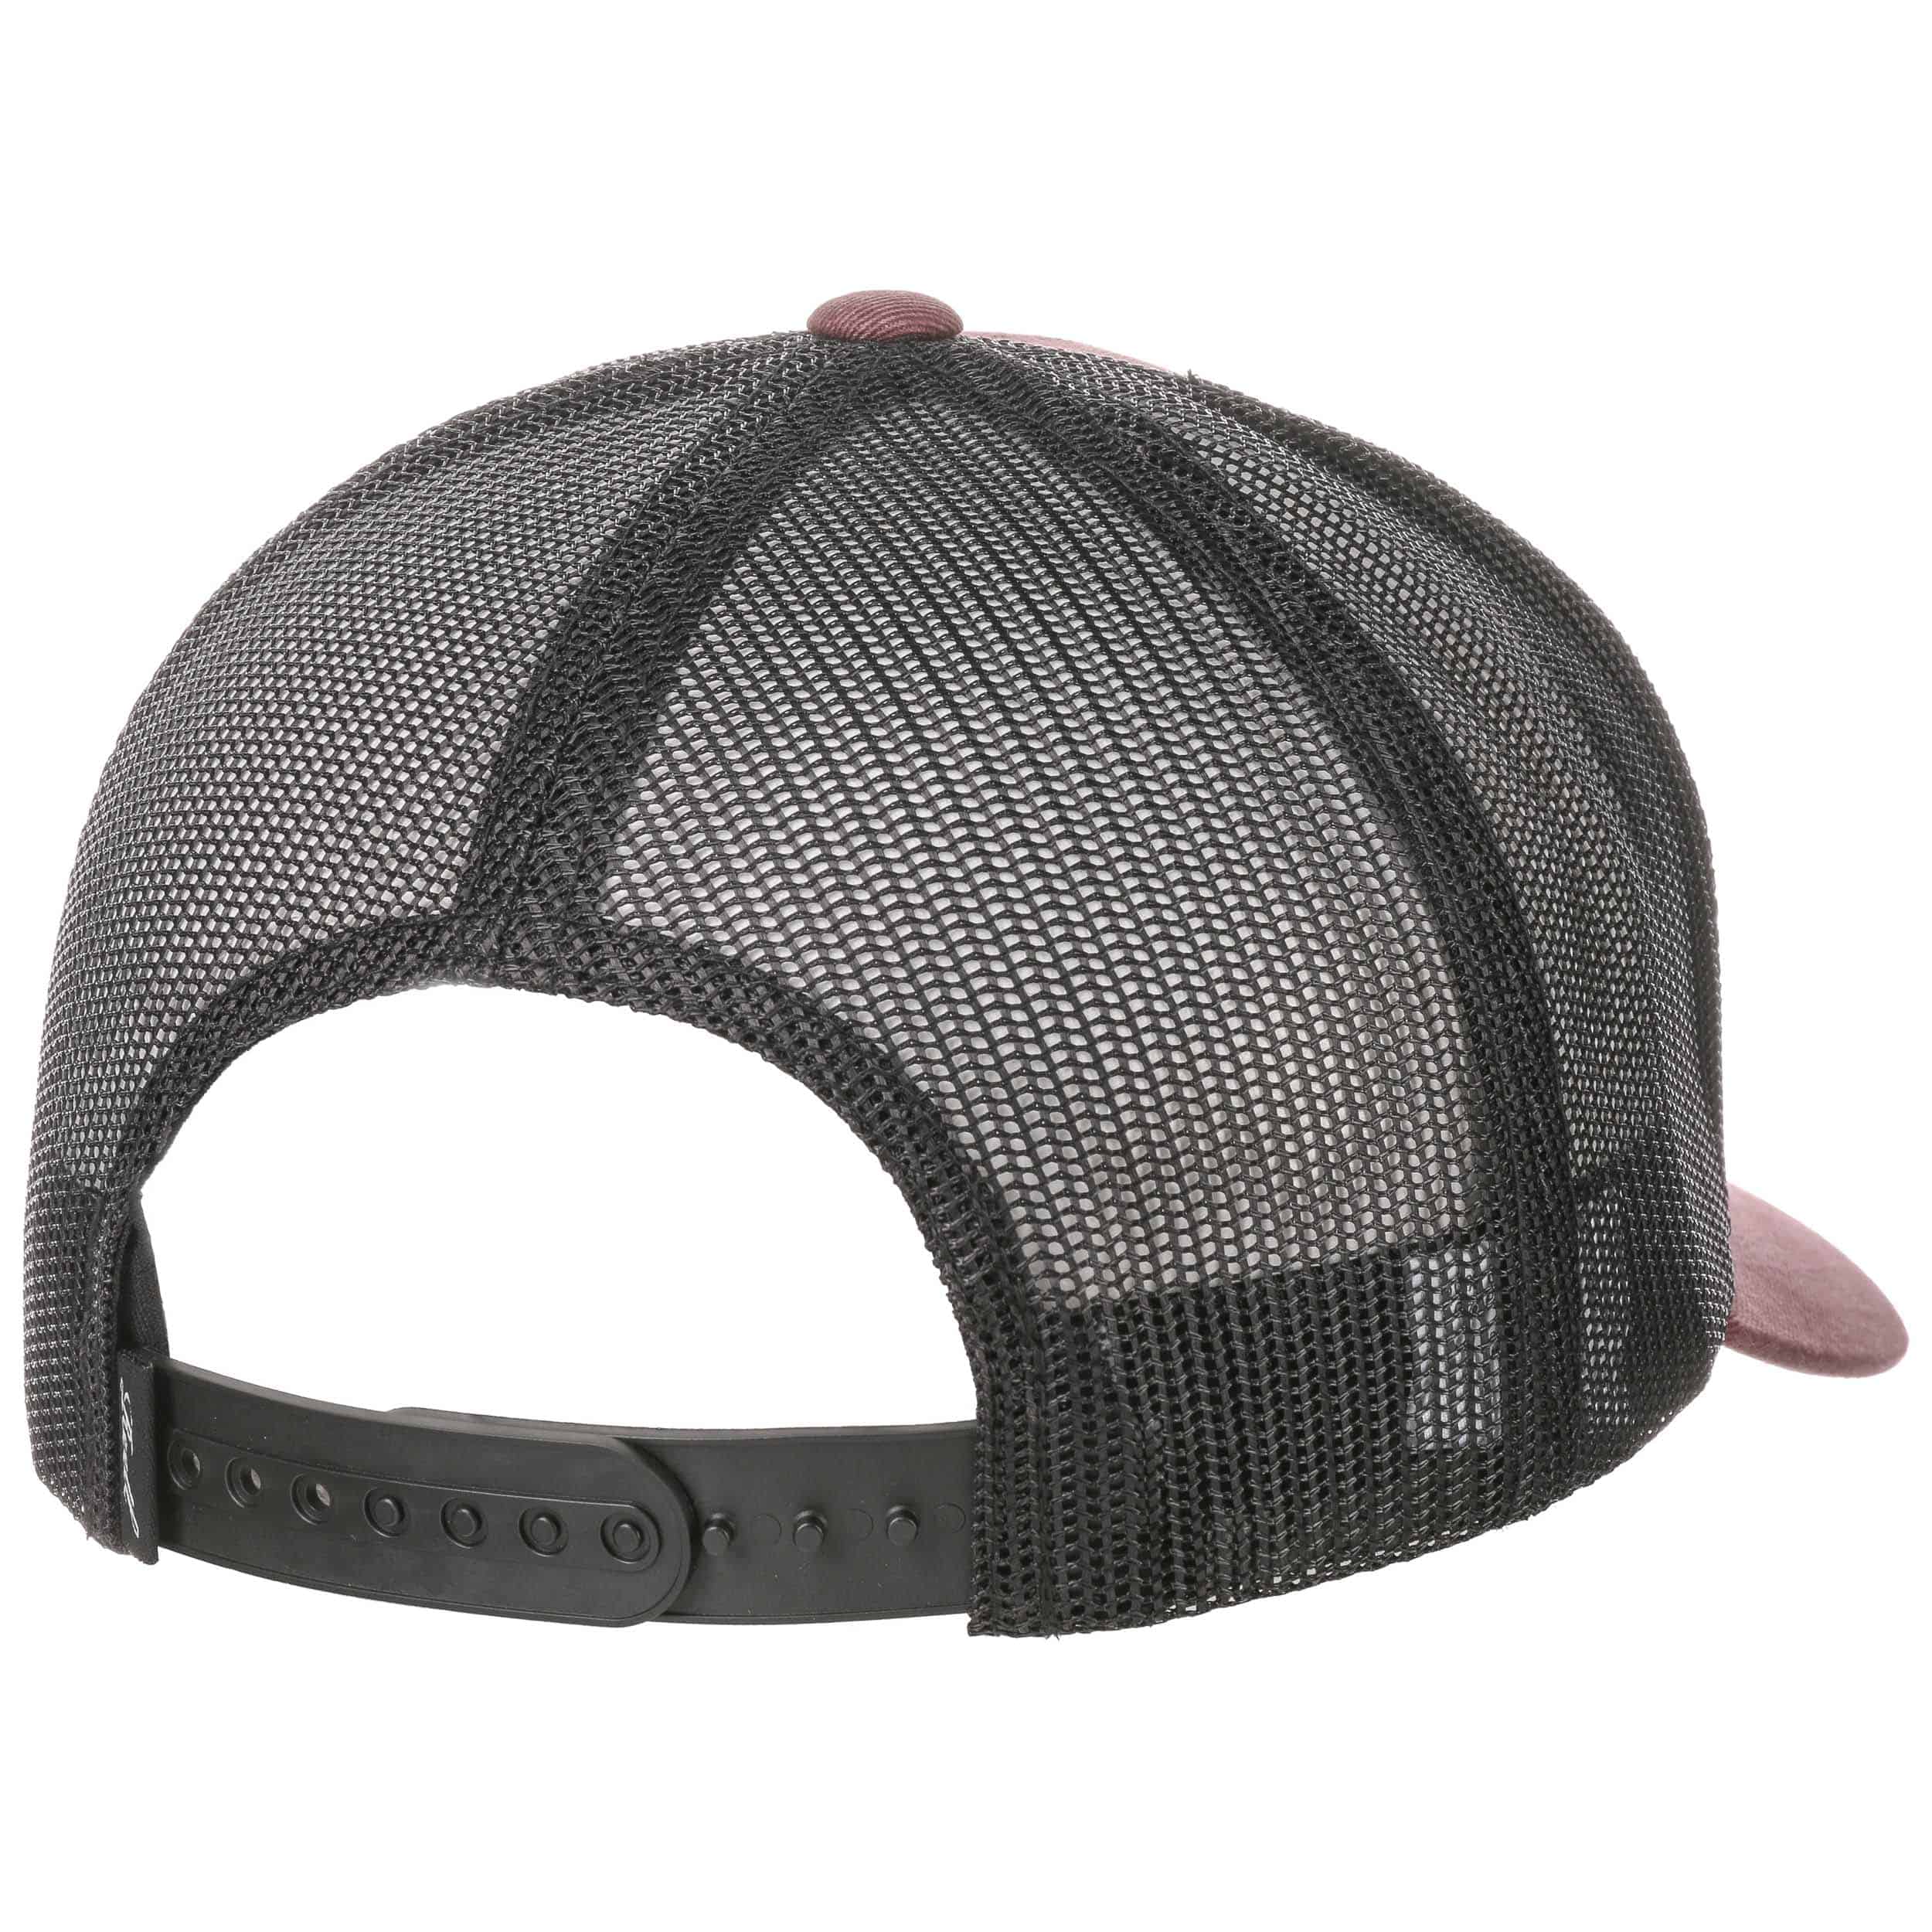 Curved Brim Trucker Cap by Reell - 32,95